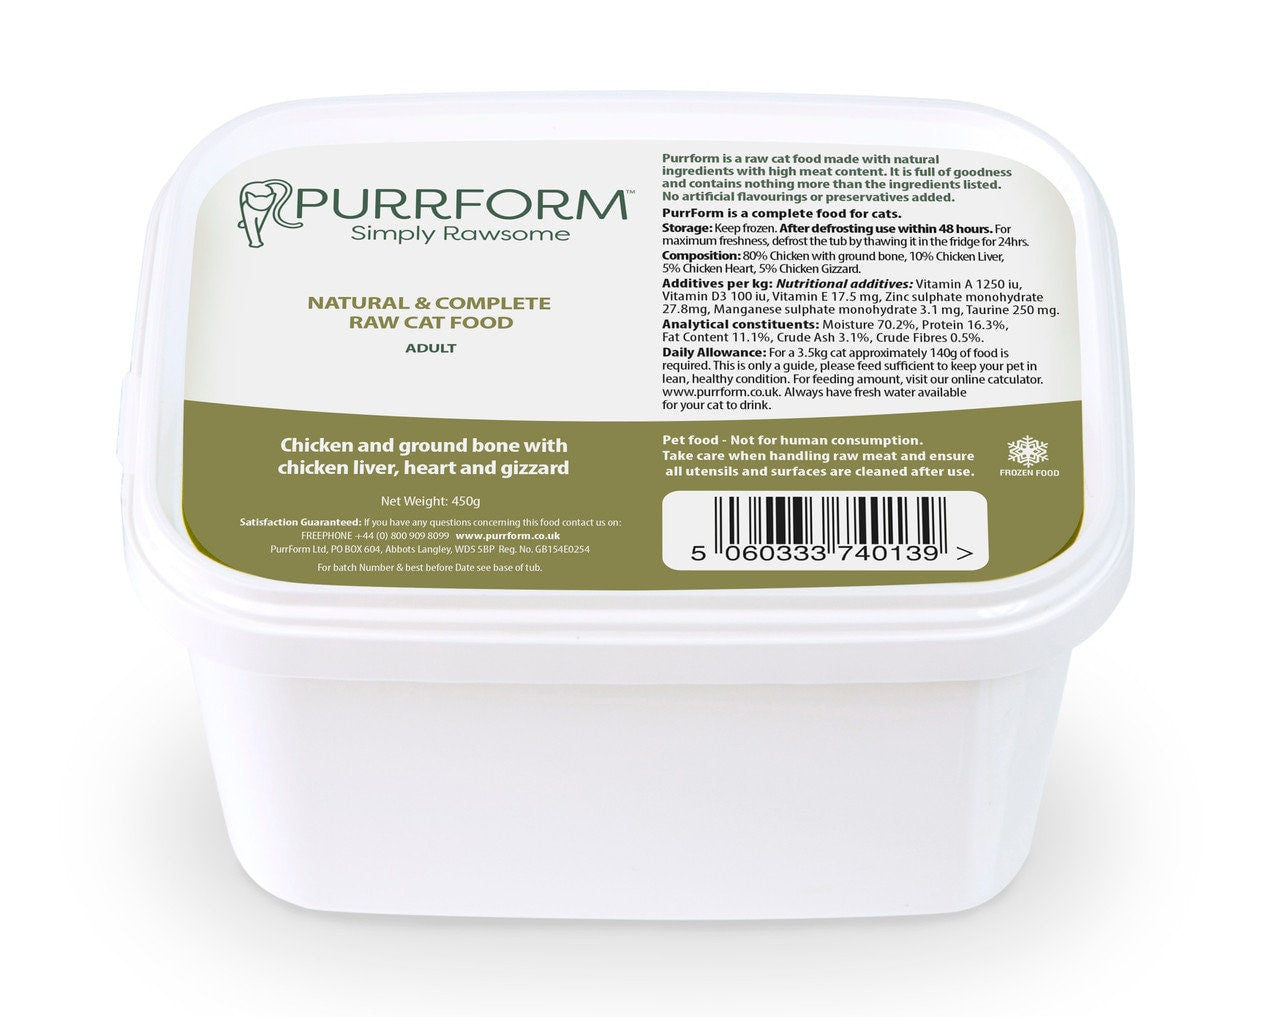 Cat Premium Organic Raw Food 10 Tubs of Purrform Farmed Chicken with Ground Bone with Chicken Liver Heart & Gizzard